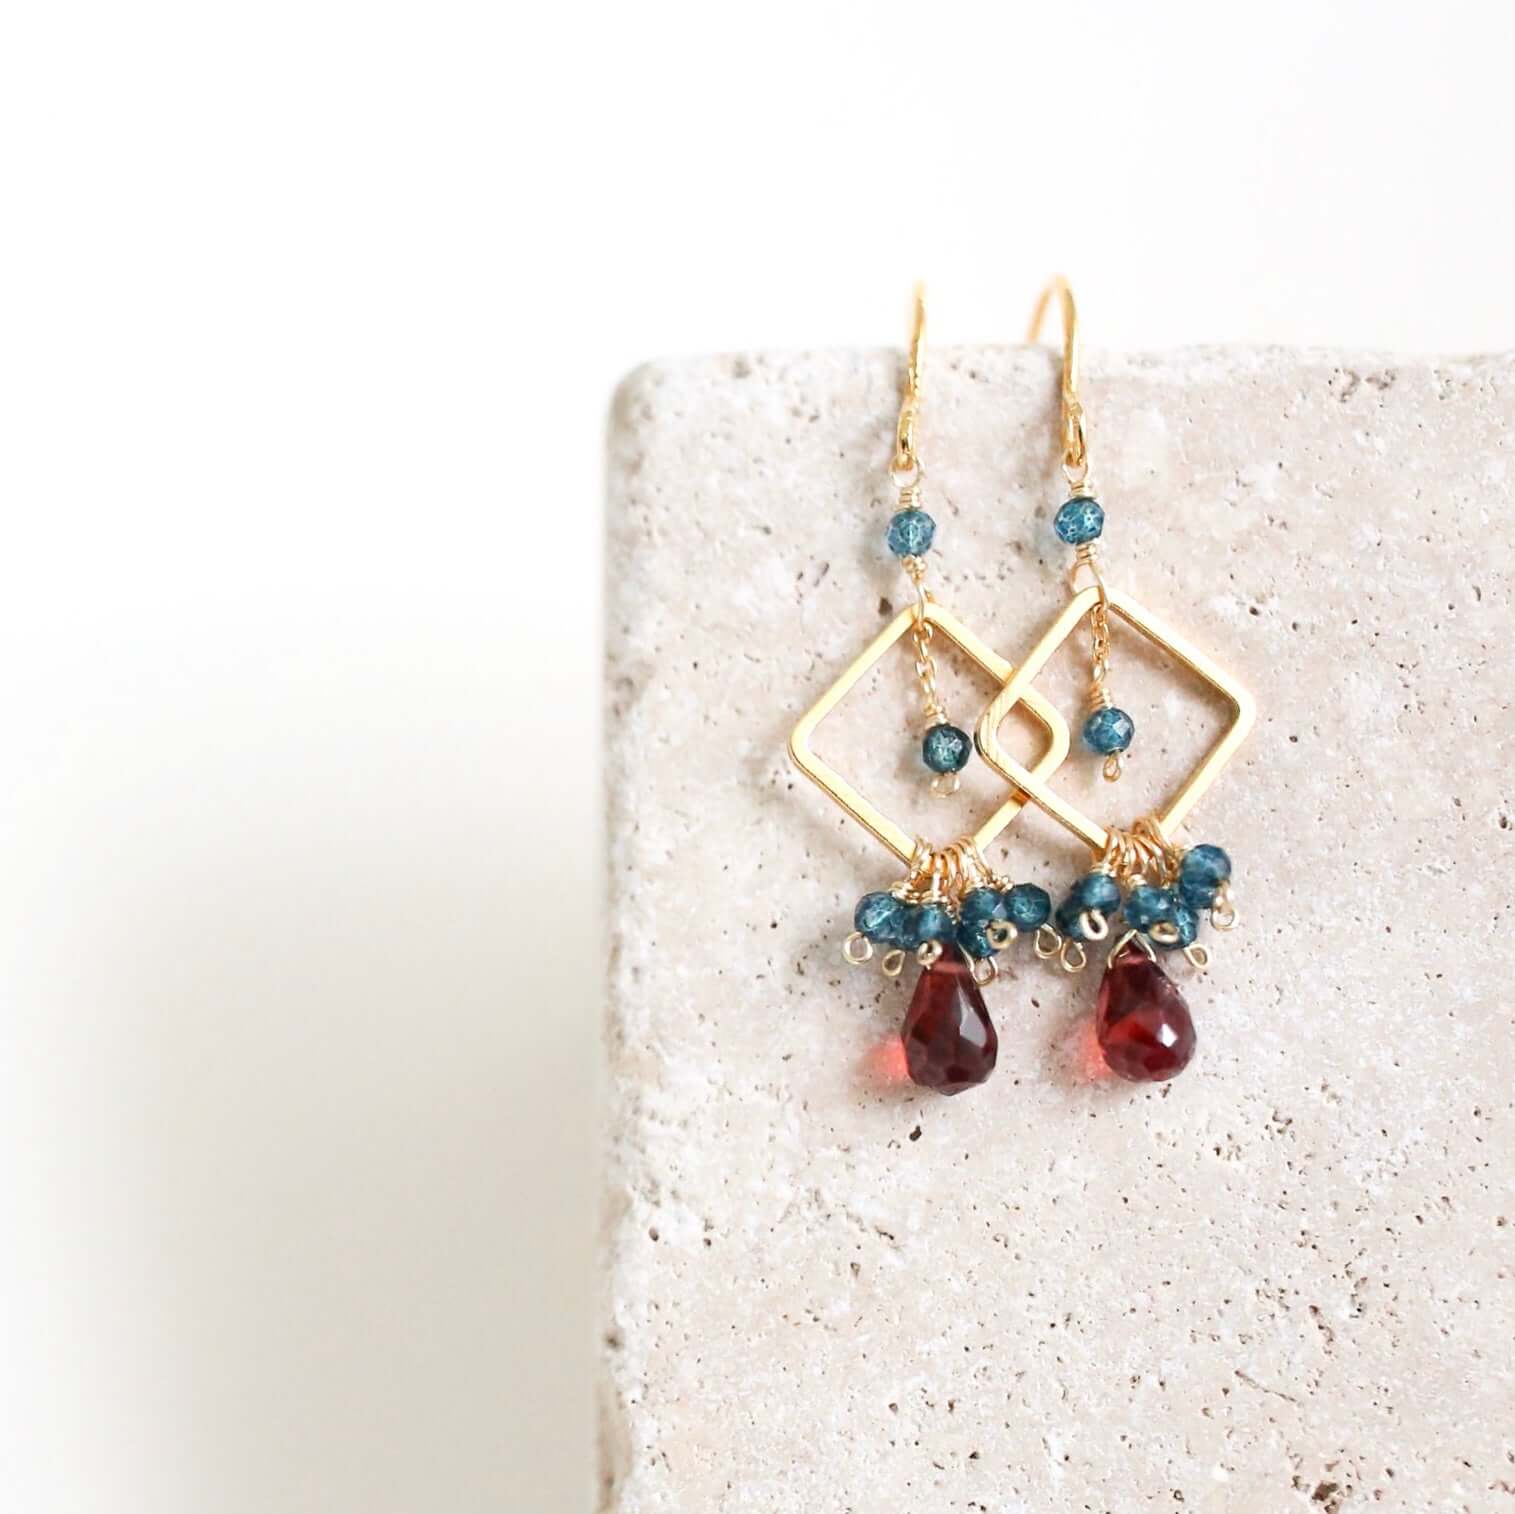 Garnet briolette gemstones with Iolite Accent stones  French Hook Gold Earrings 